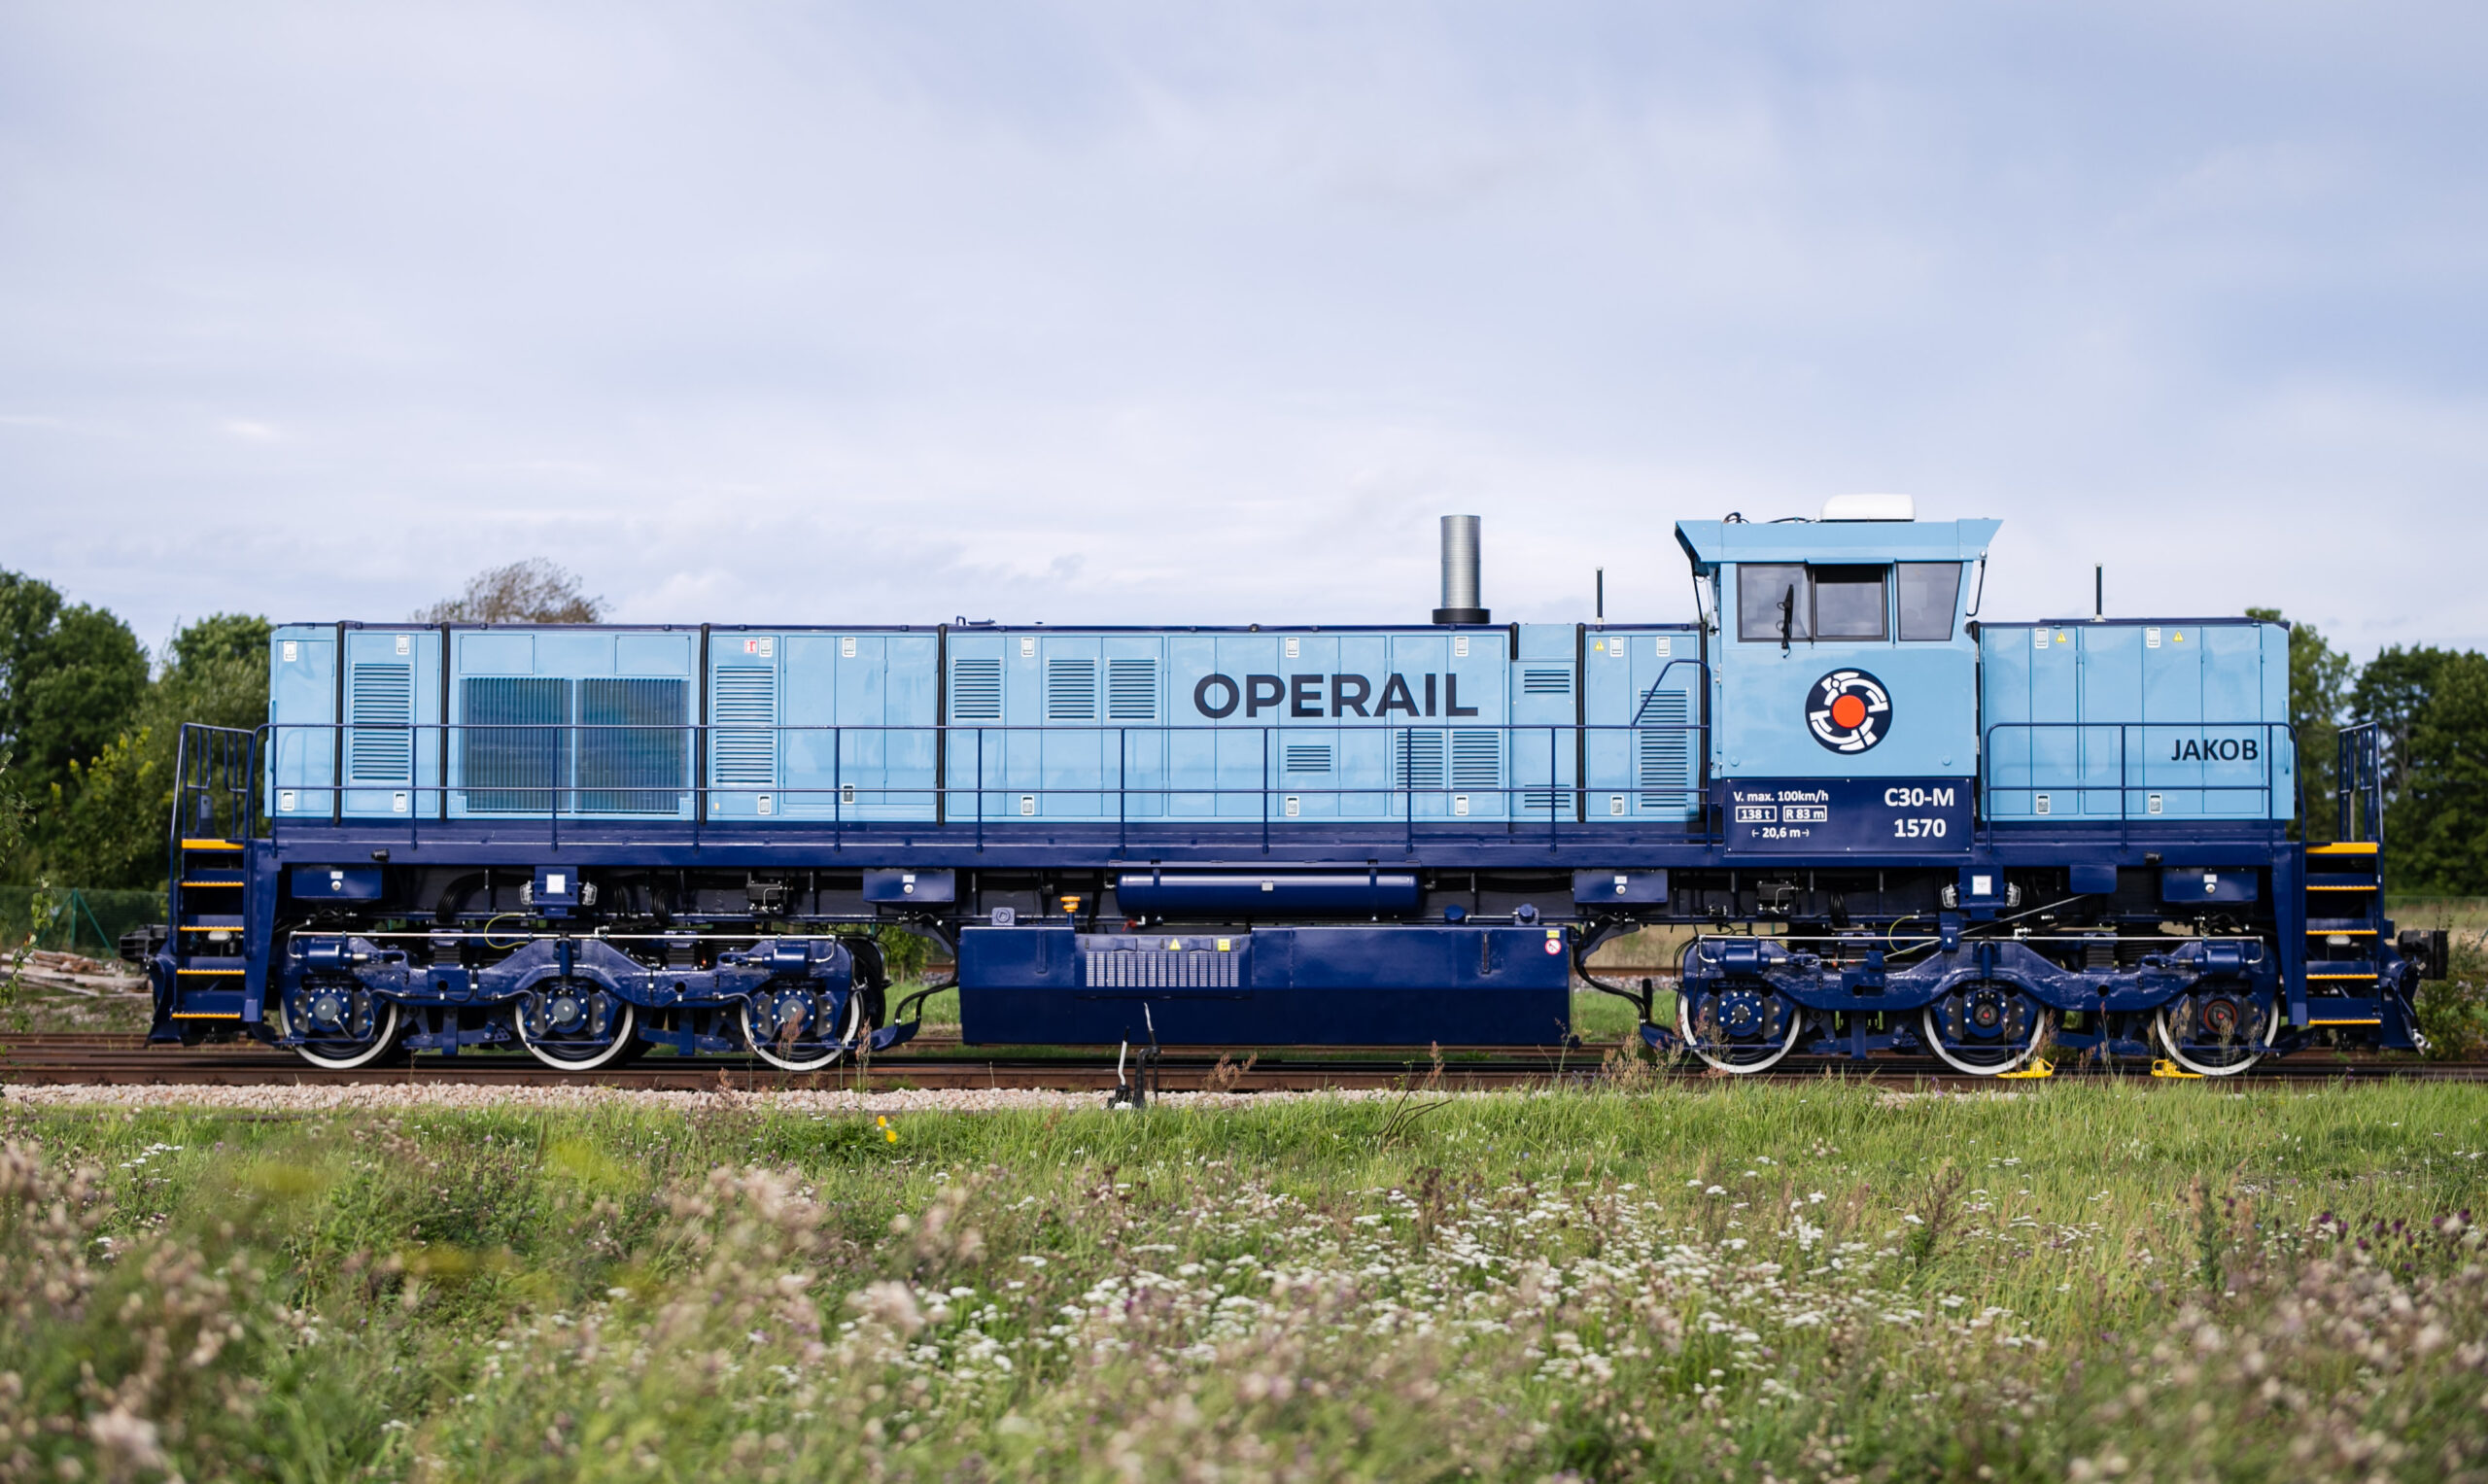 A new online home for Operail C30-M locomotives